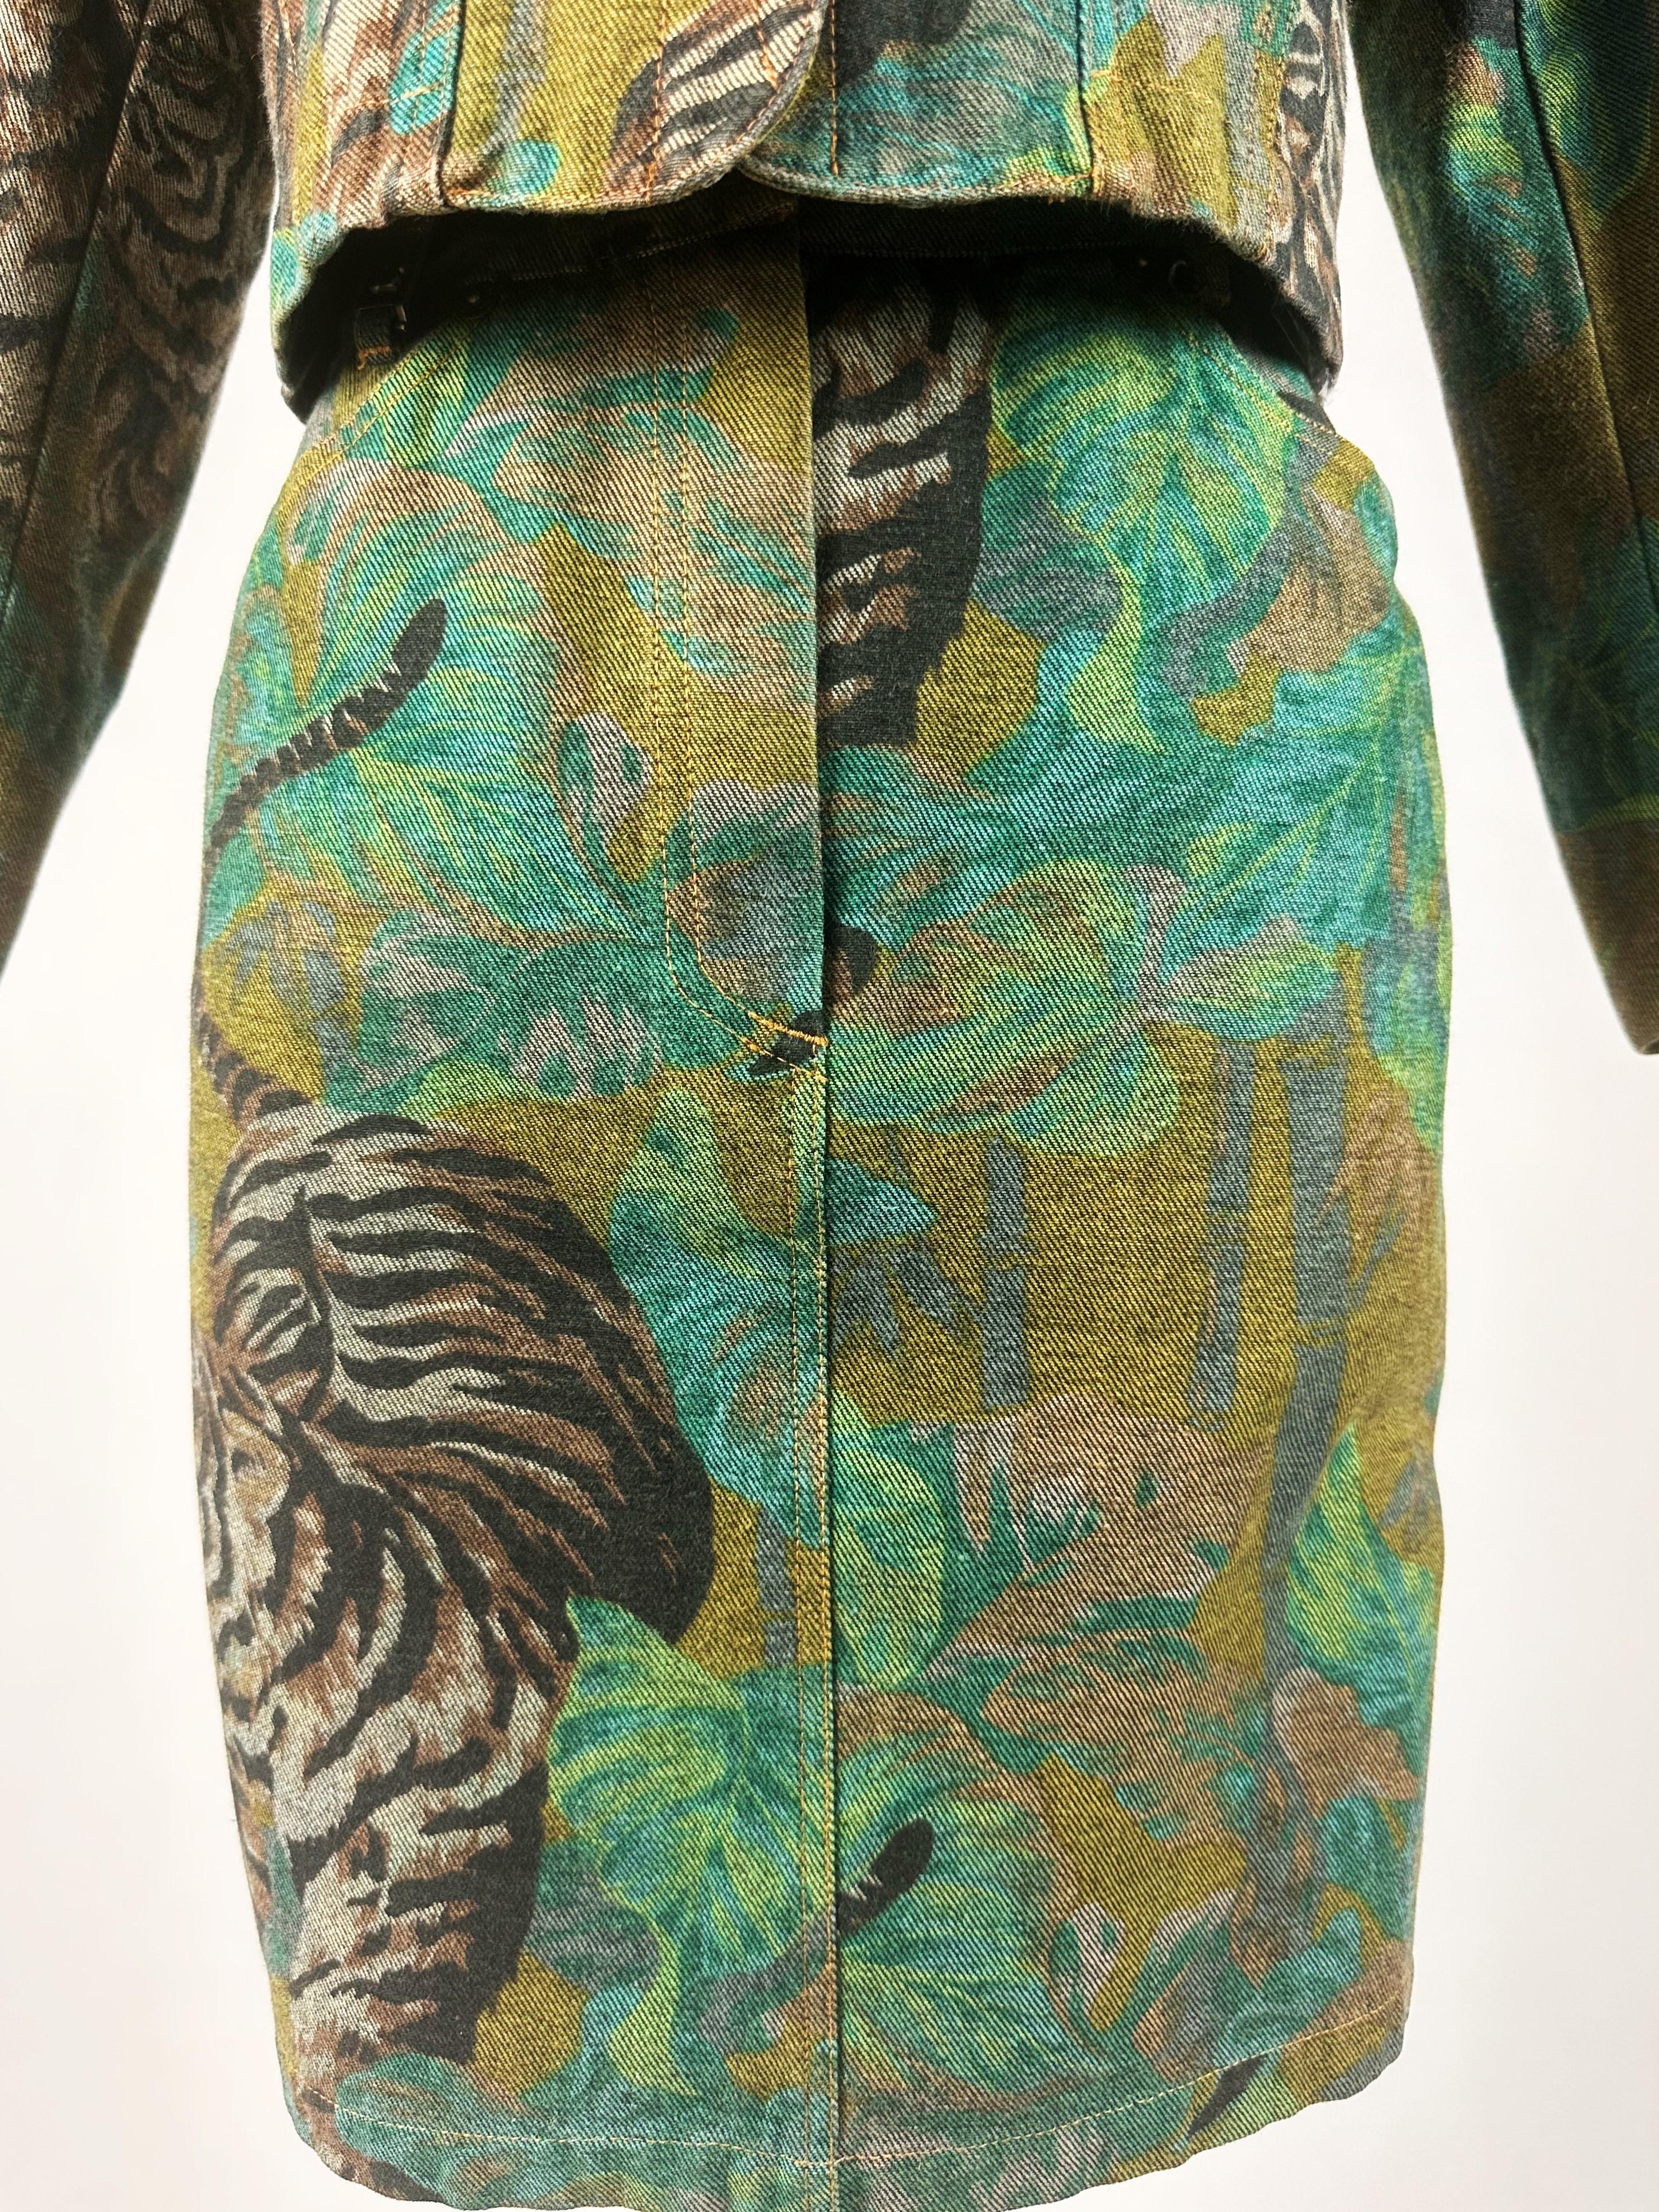 Women's Jacket and Skirt by Kenzo Takada, Jungle & Tiger Print on Denim - French C. 1990 For Sale